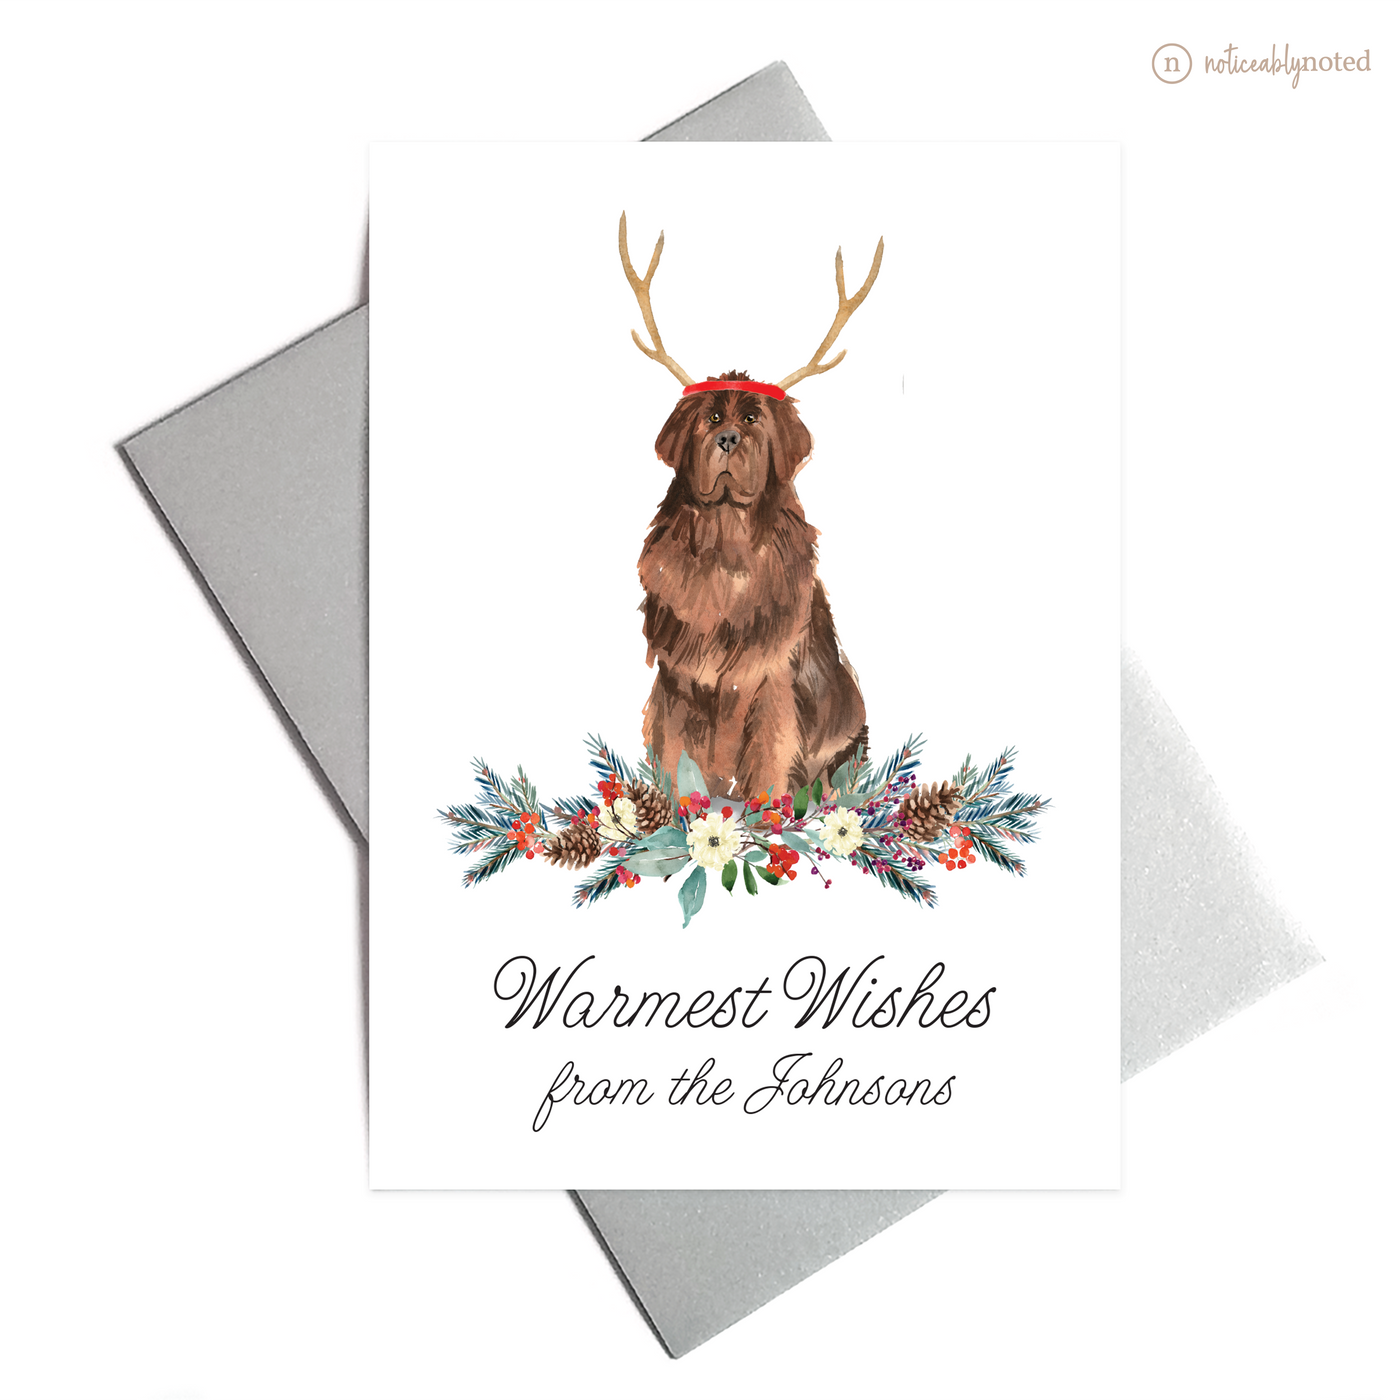 Newfoundland Dog Holiday Greeting Cards | Noticeably Noted